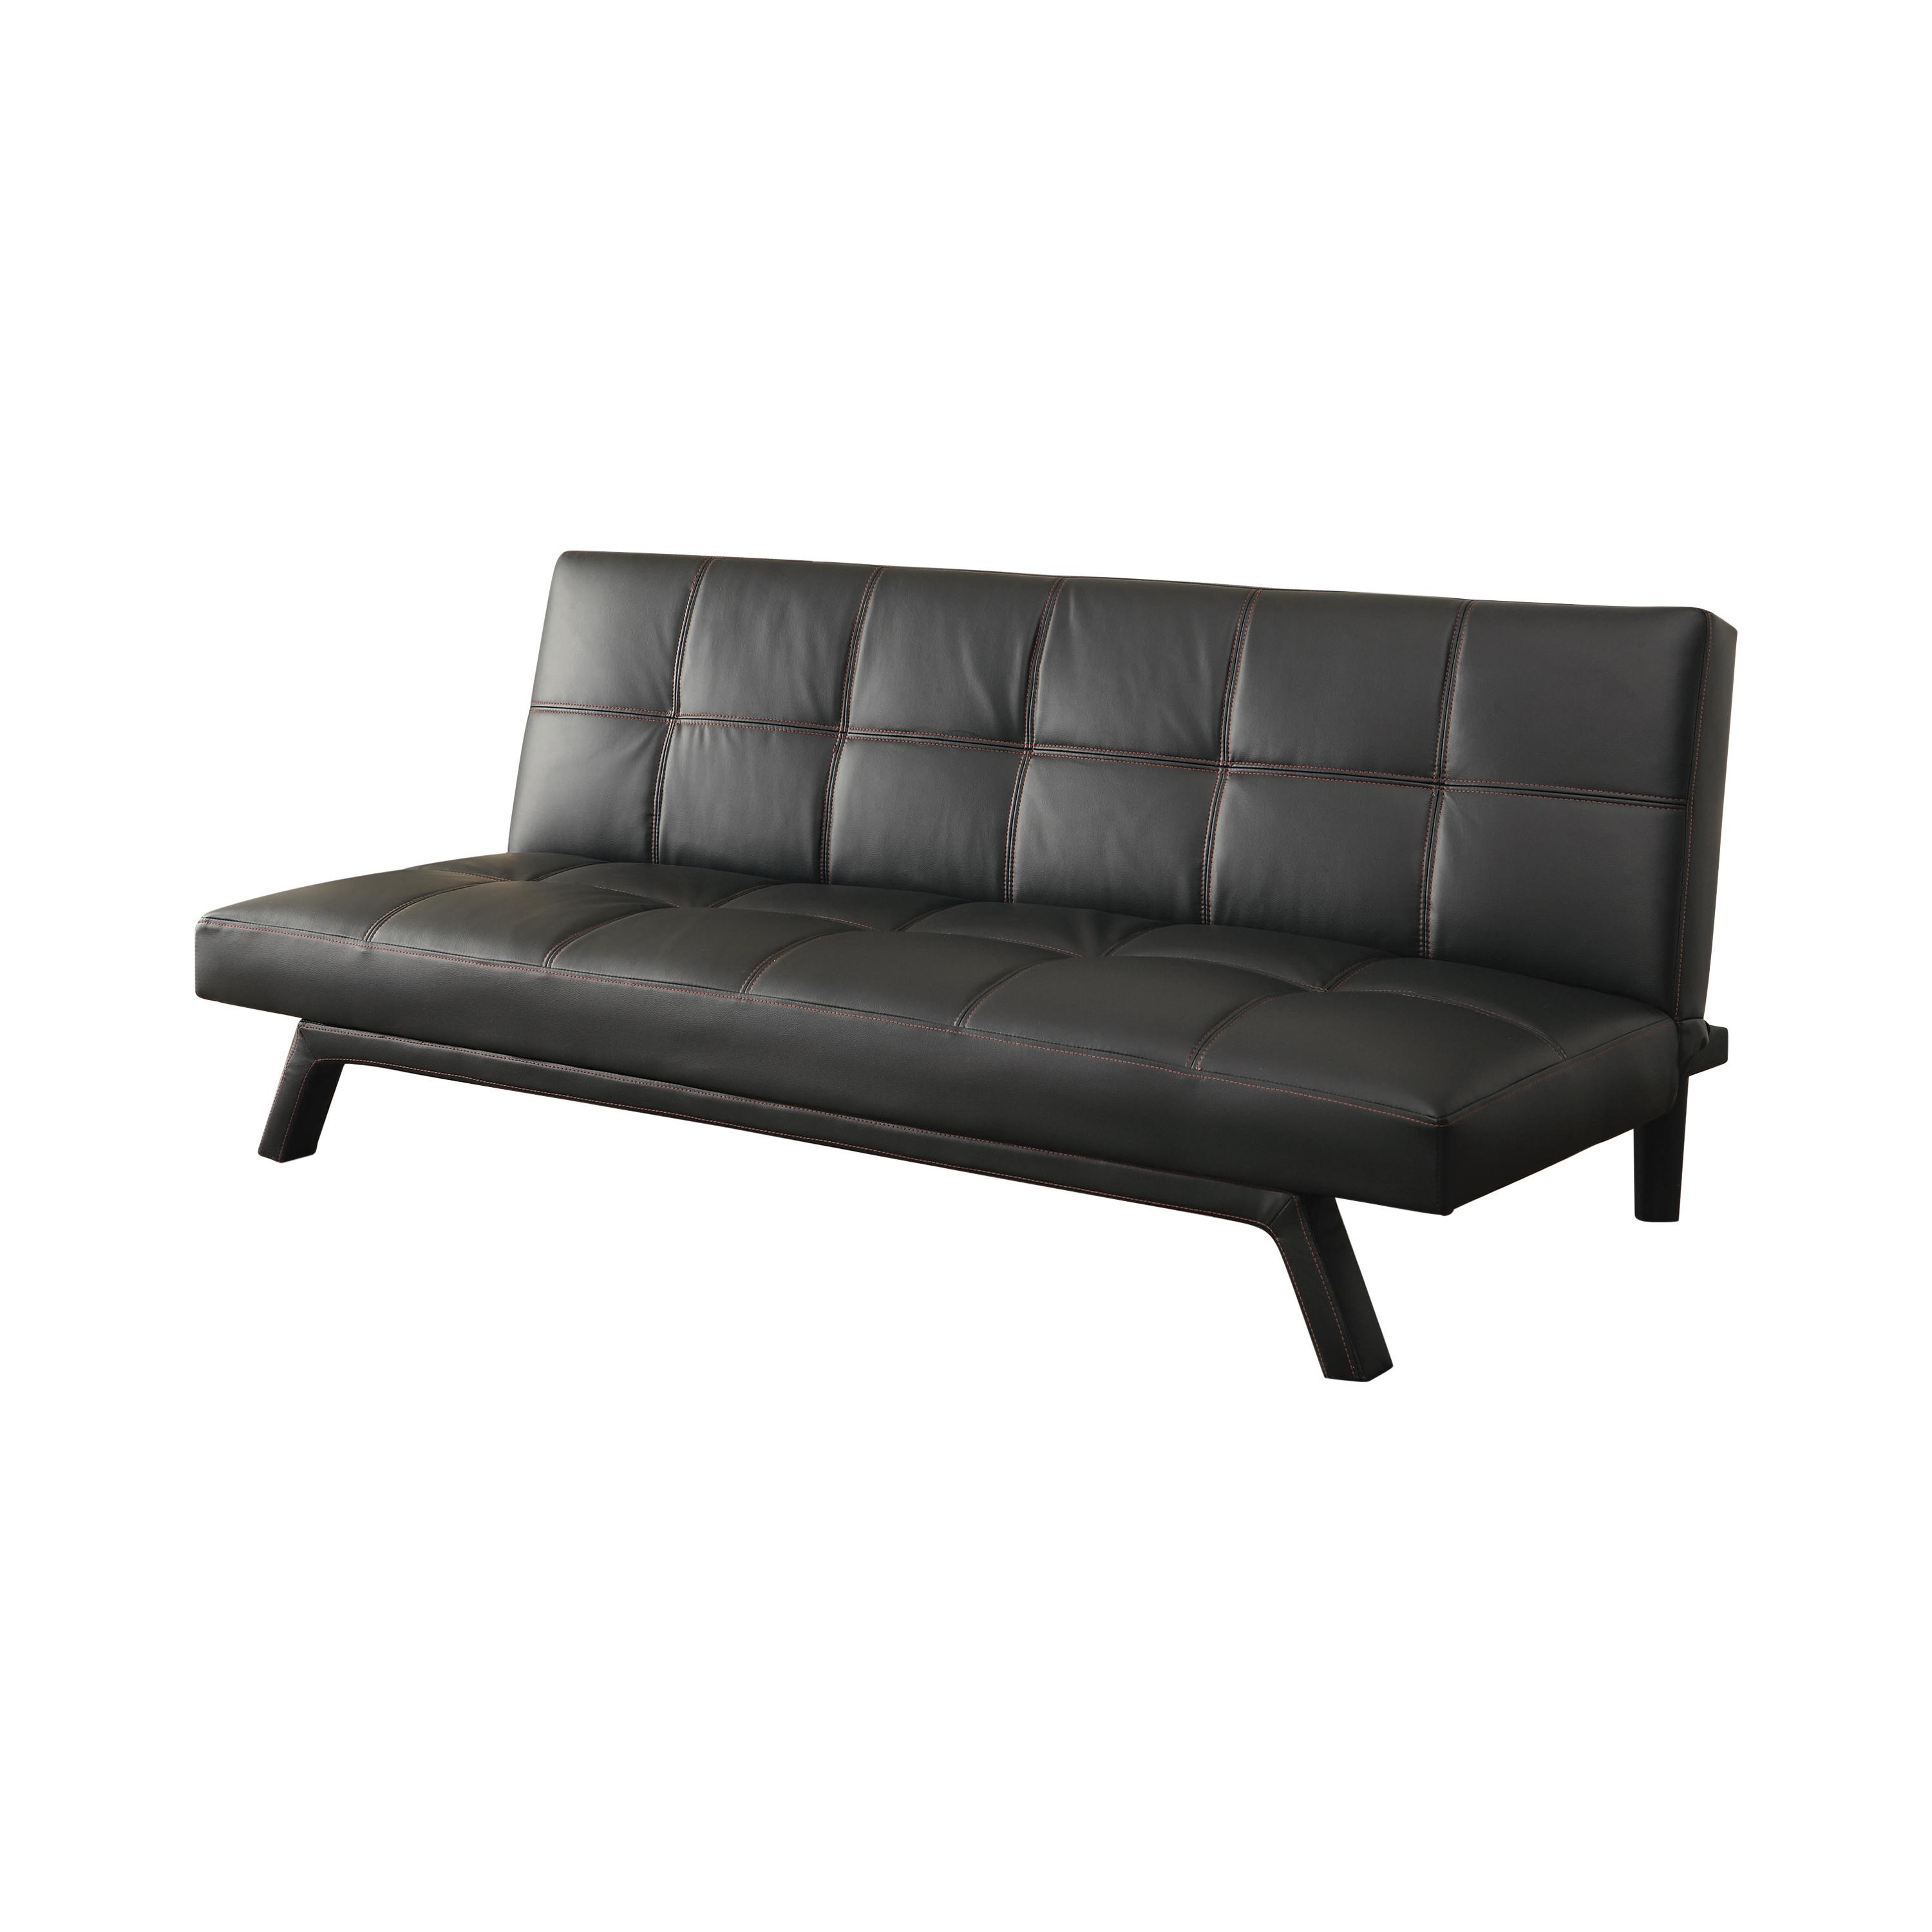 Modern Sofa bed 500765 Corrie 500765 in Black Leatherette